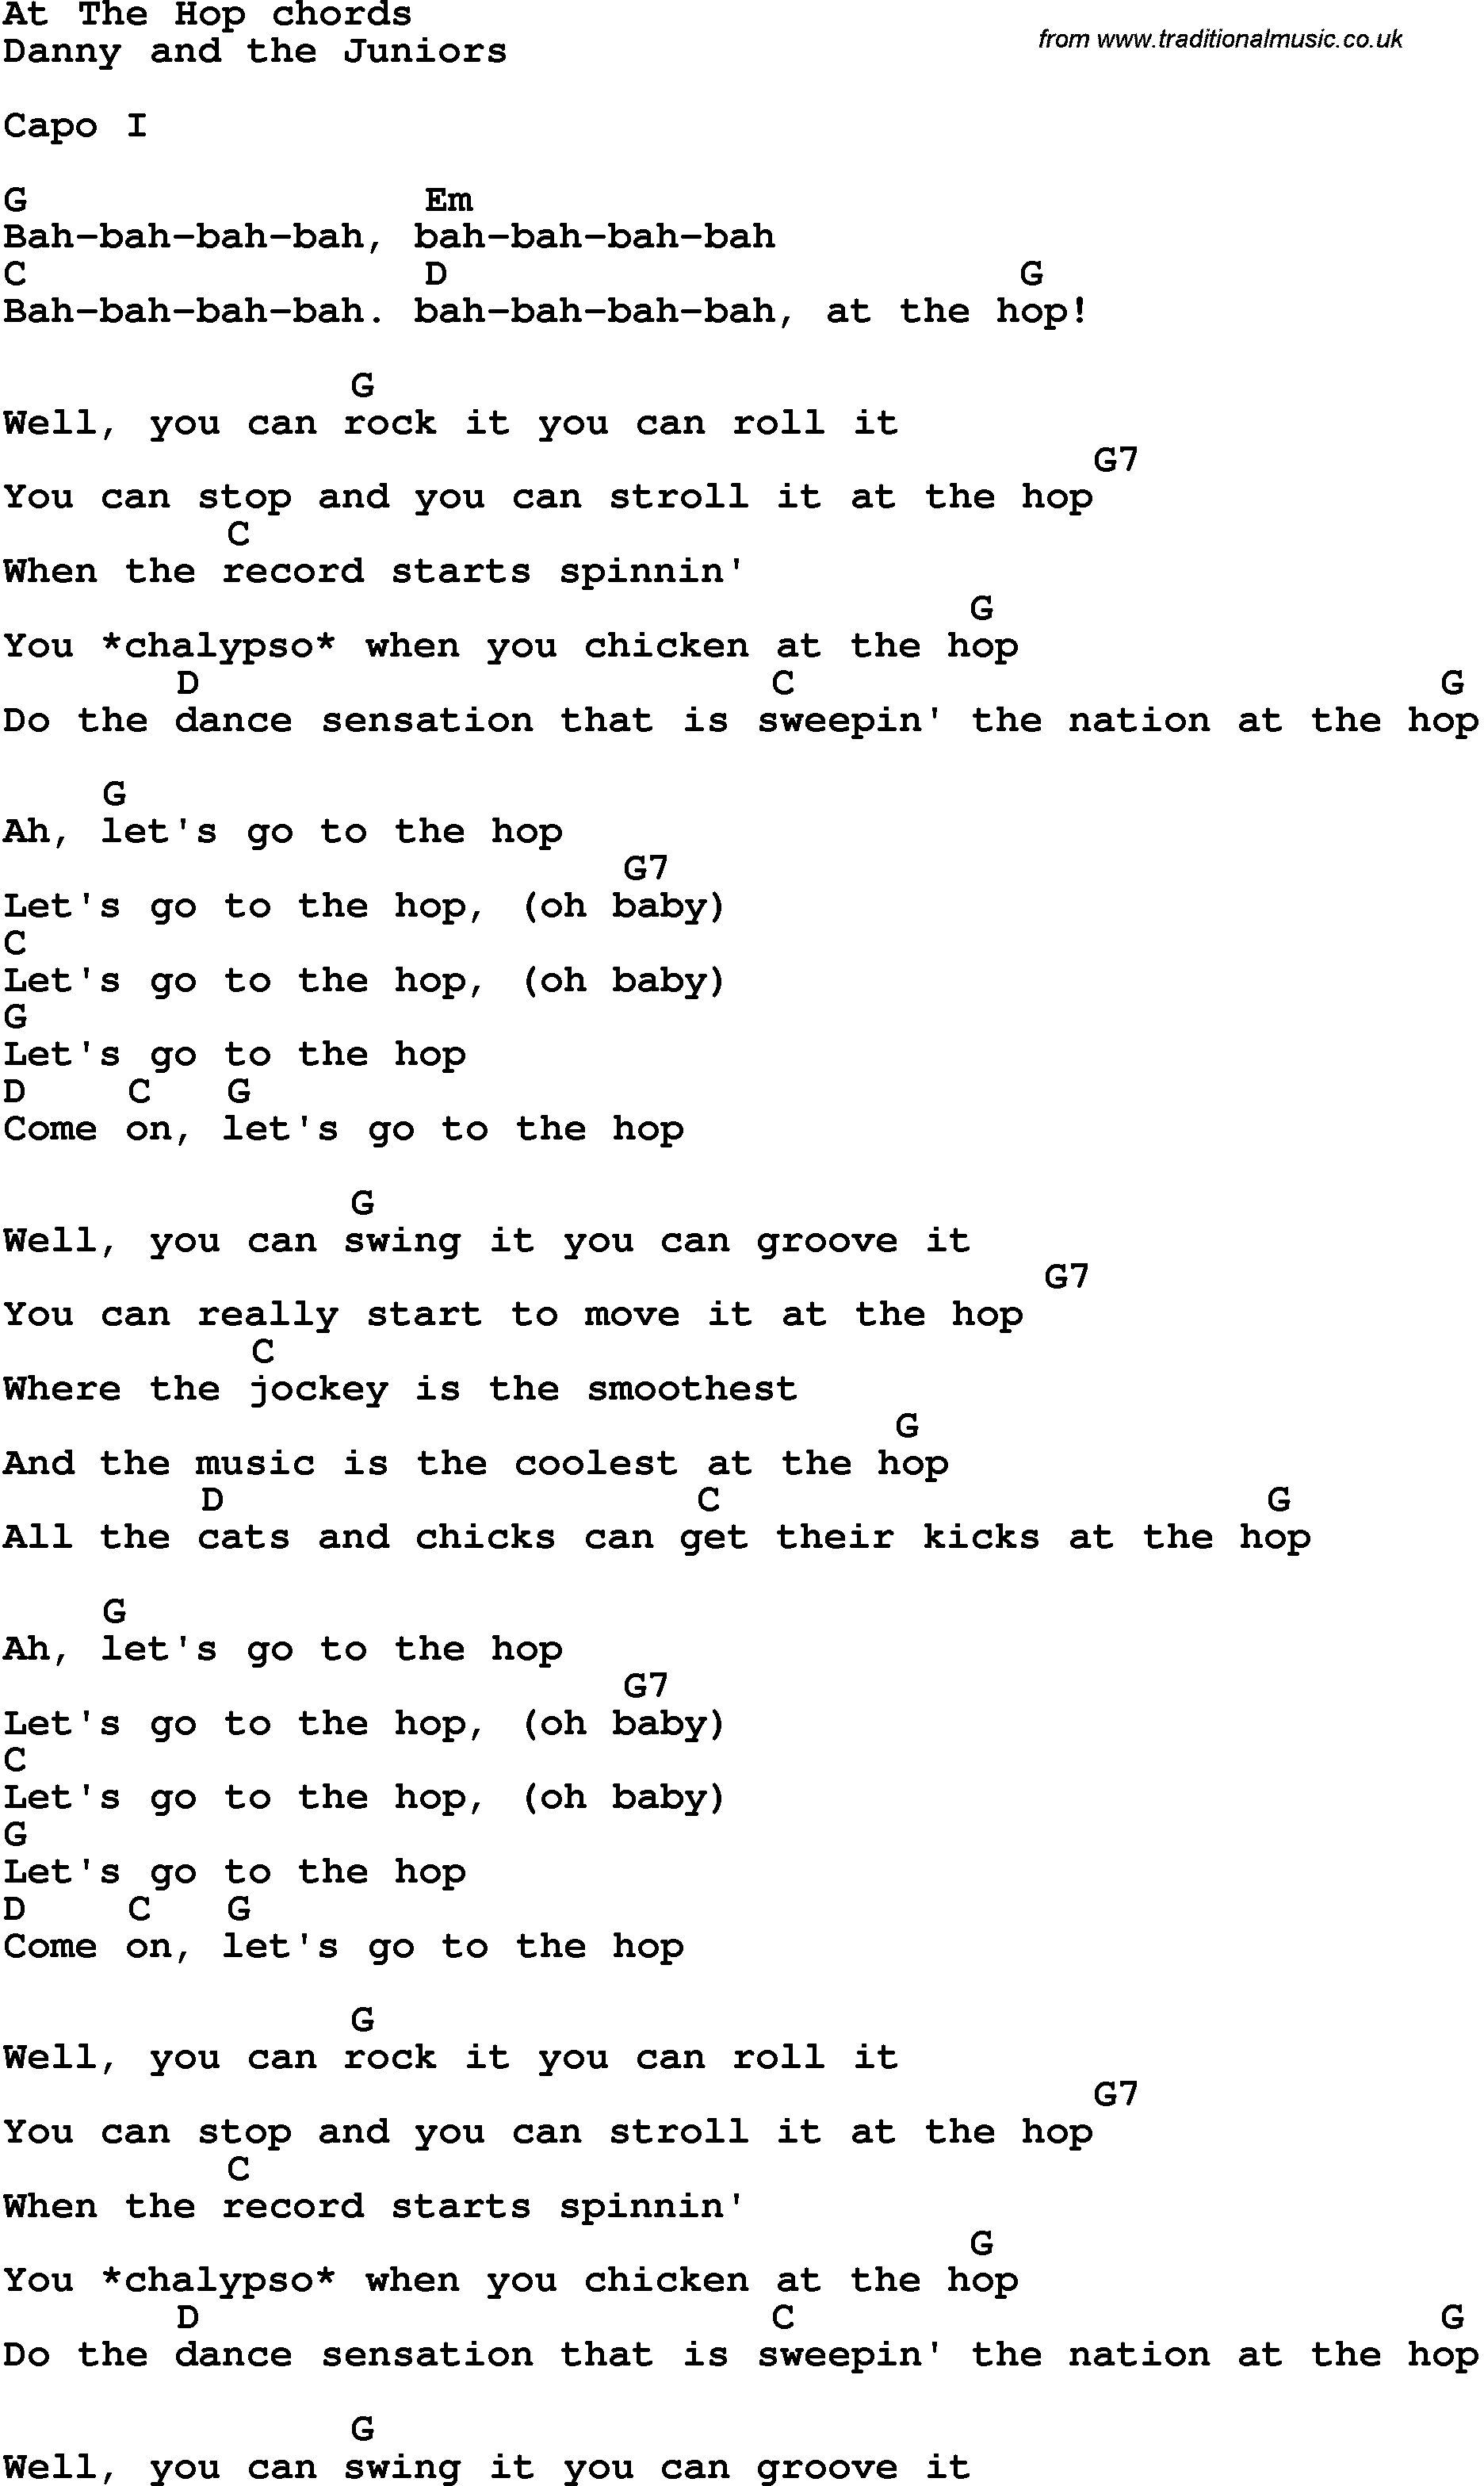 Song Lyrics with guitar chords for At The Hop